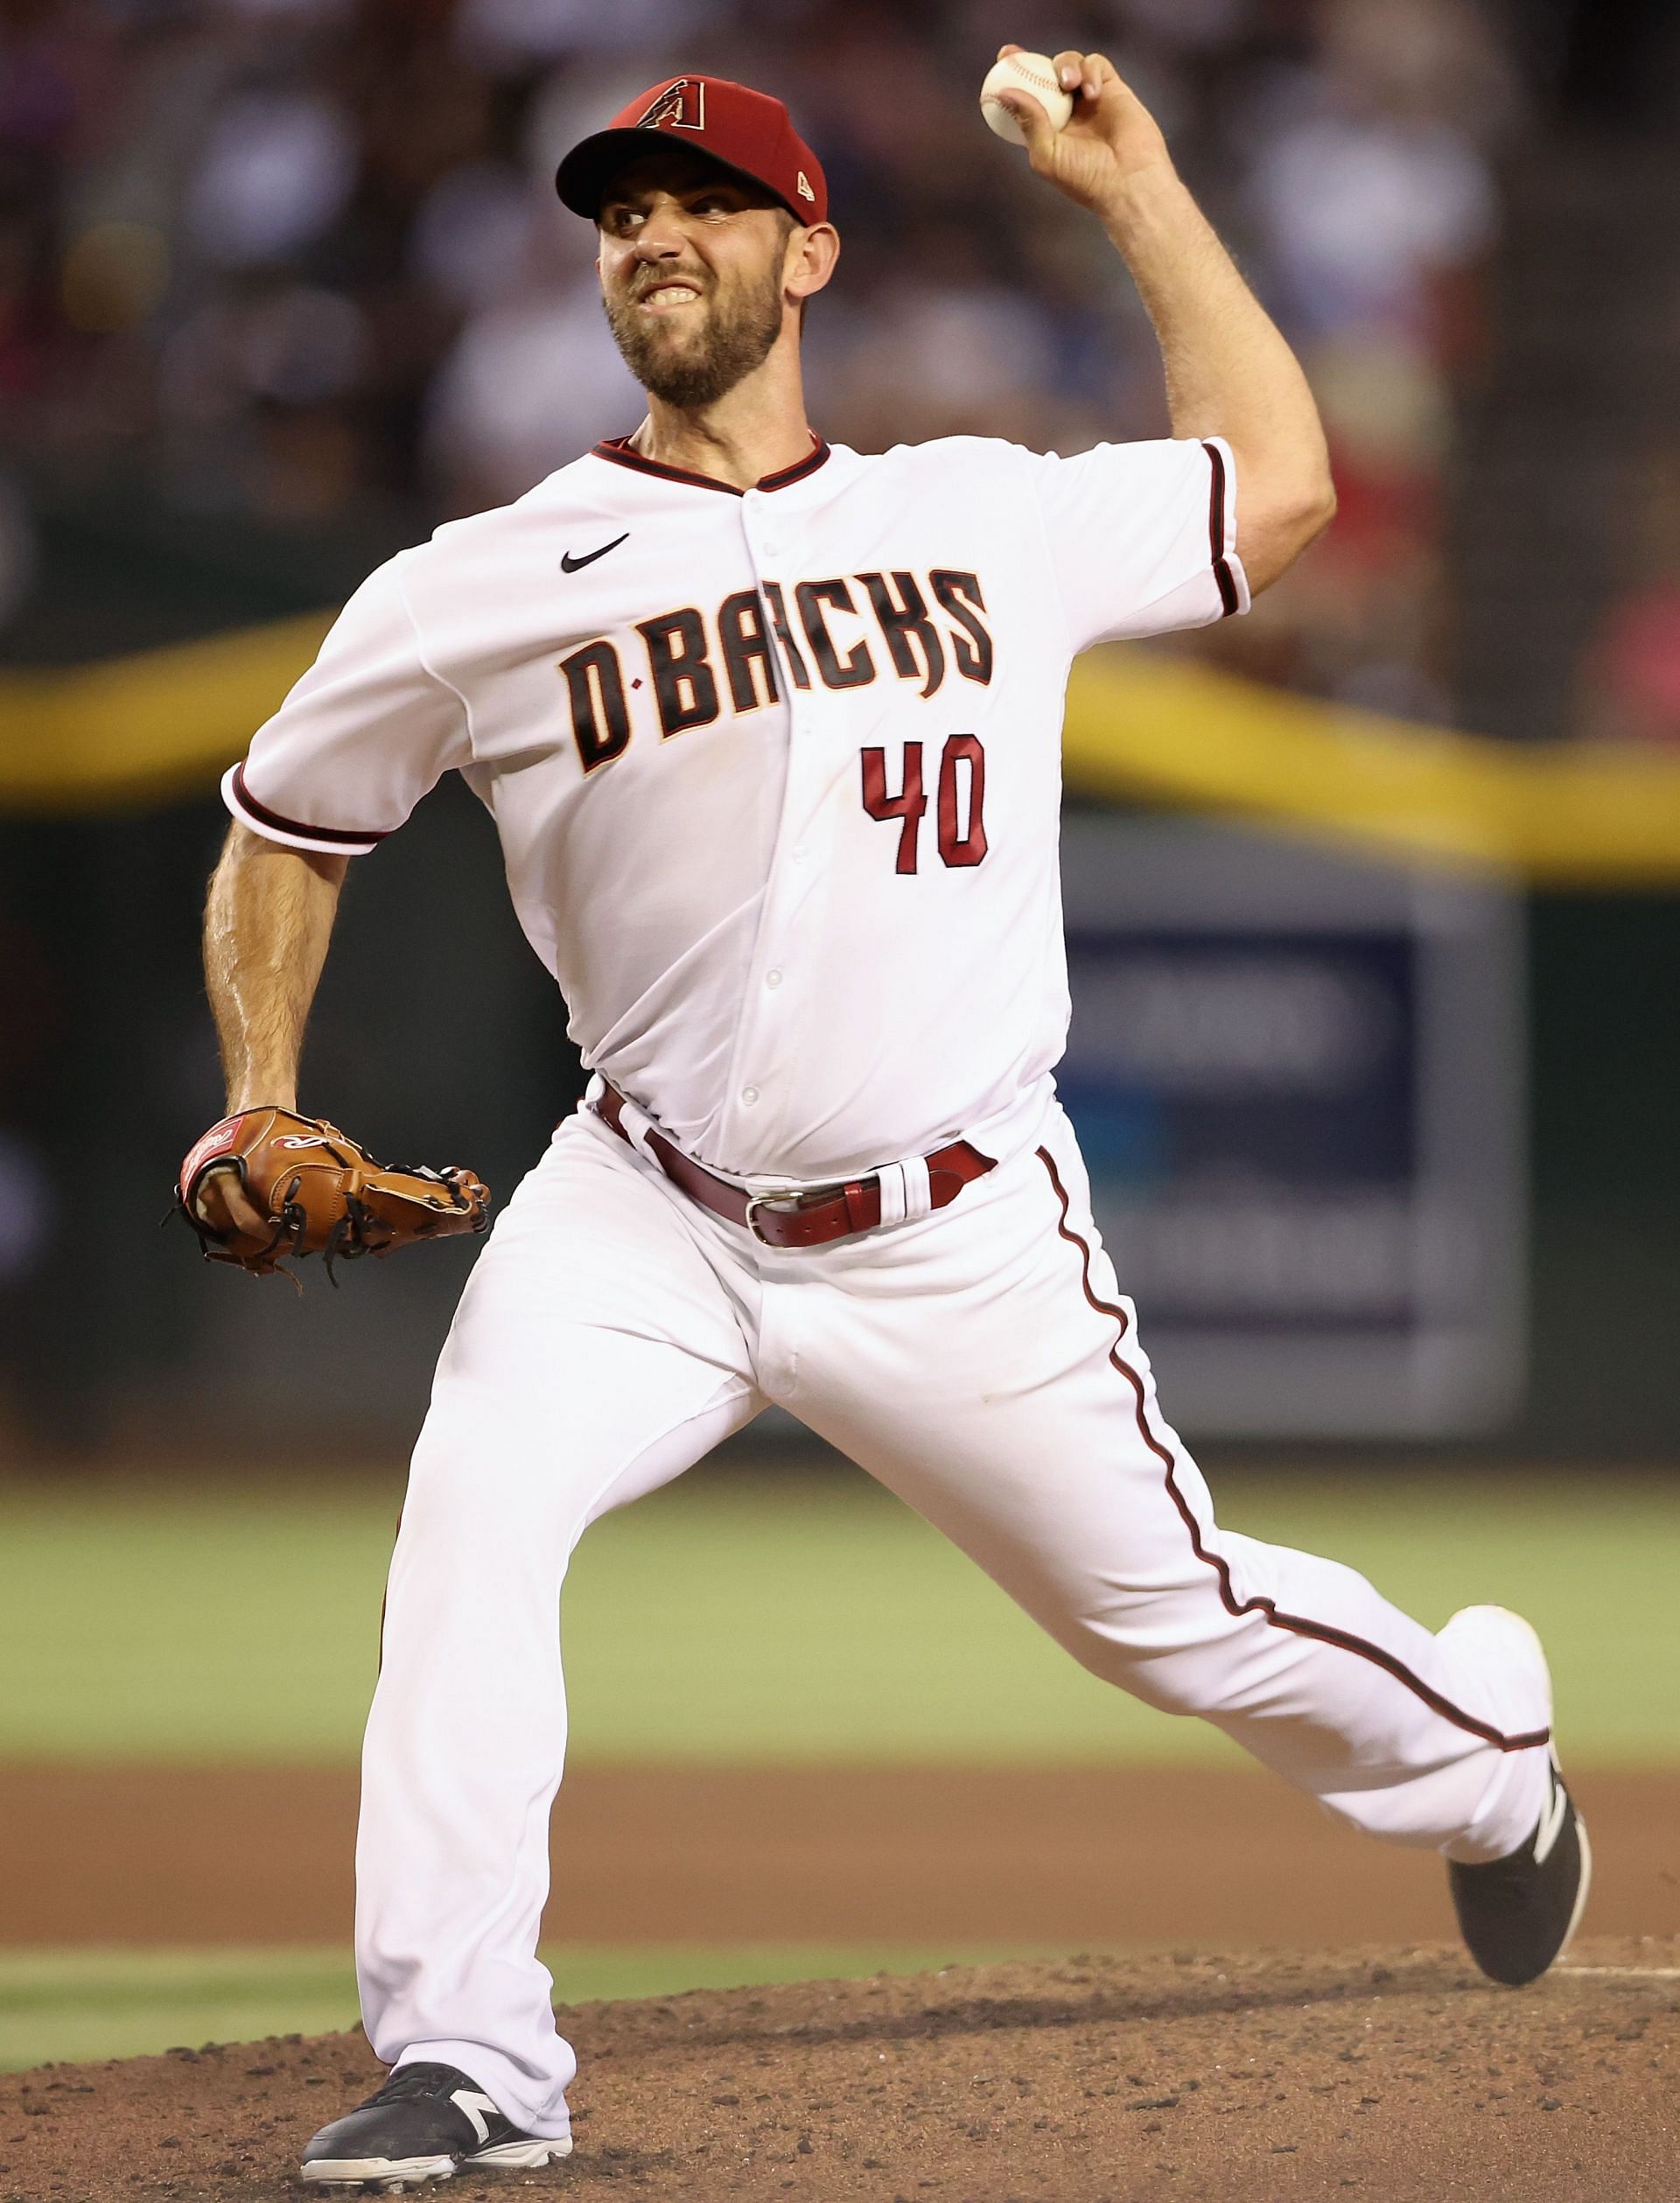 Madison Bumgarner has two years left on his contract with the Diamondbacks in the MLB